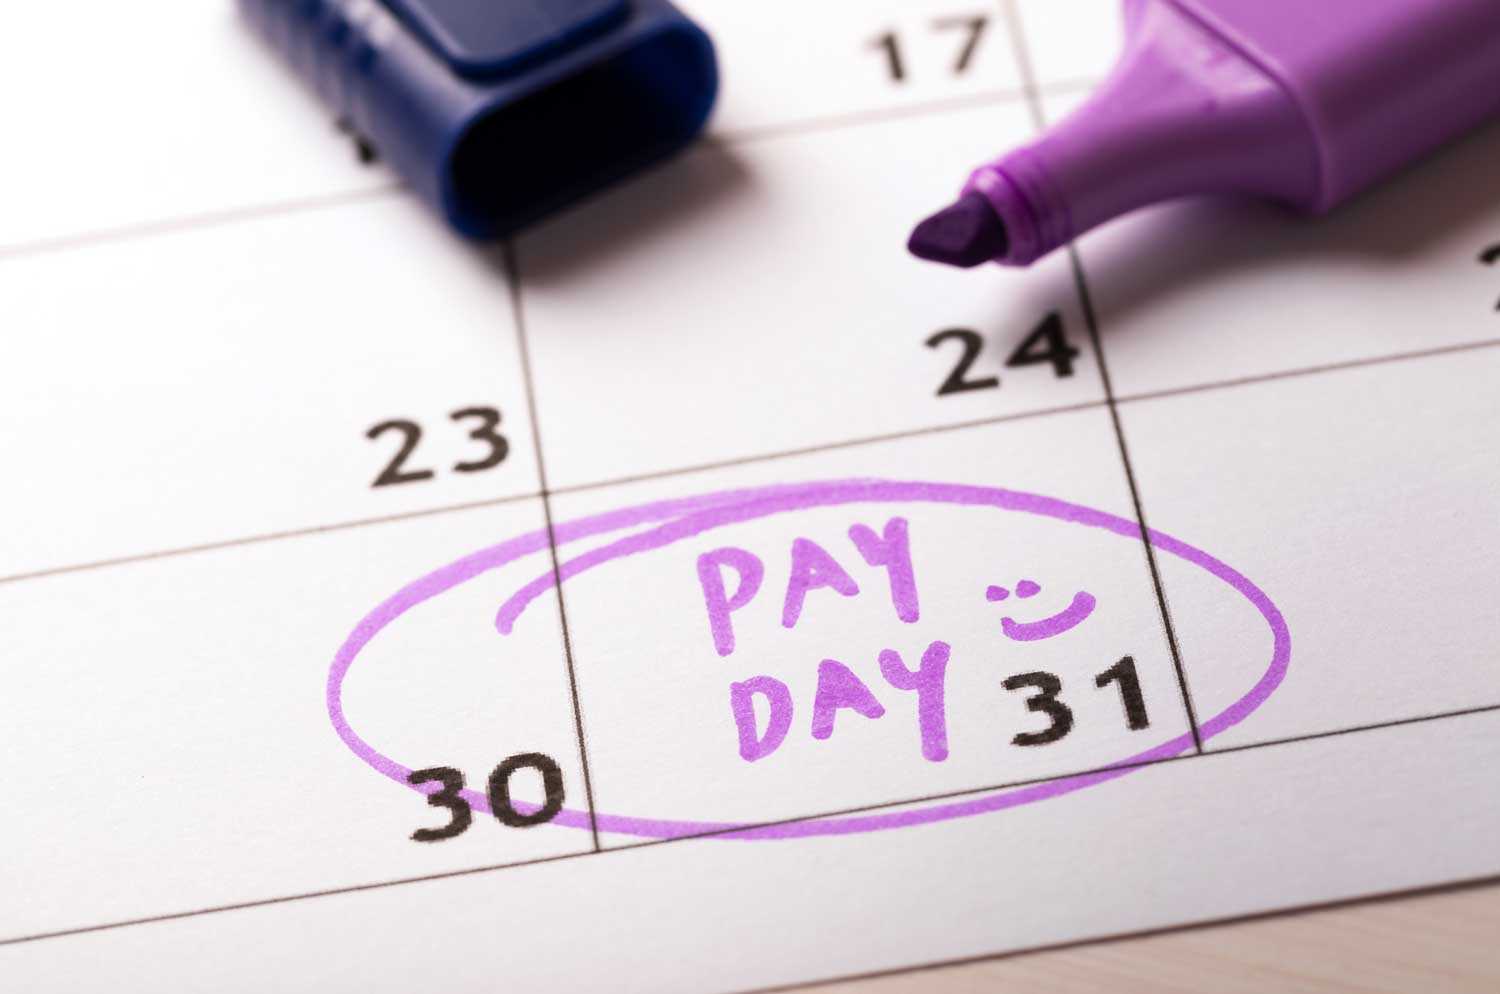 Calendar With Pay Day Written and Circled